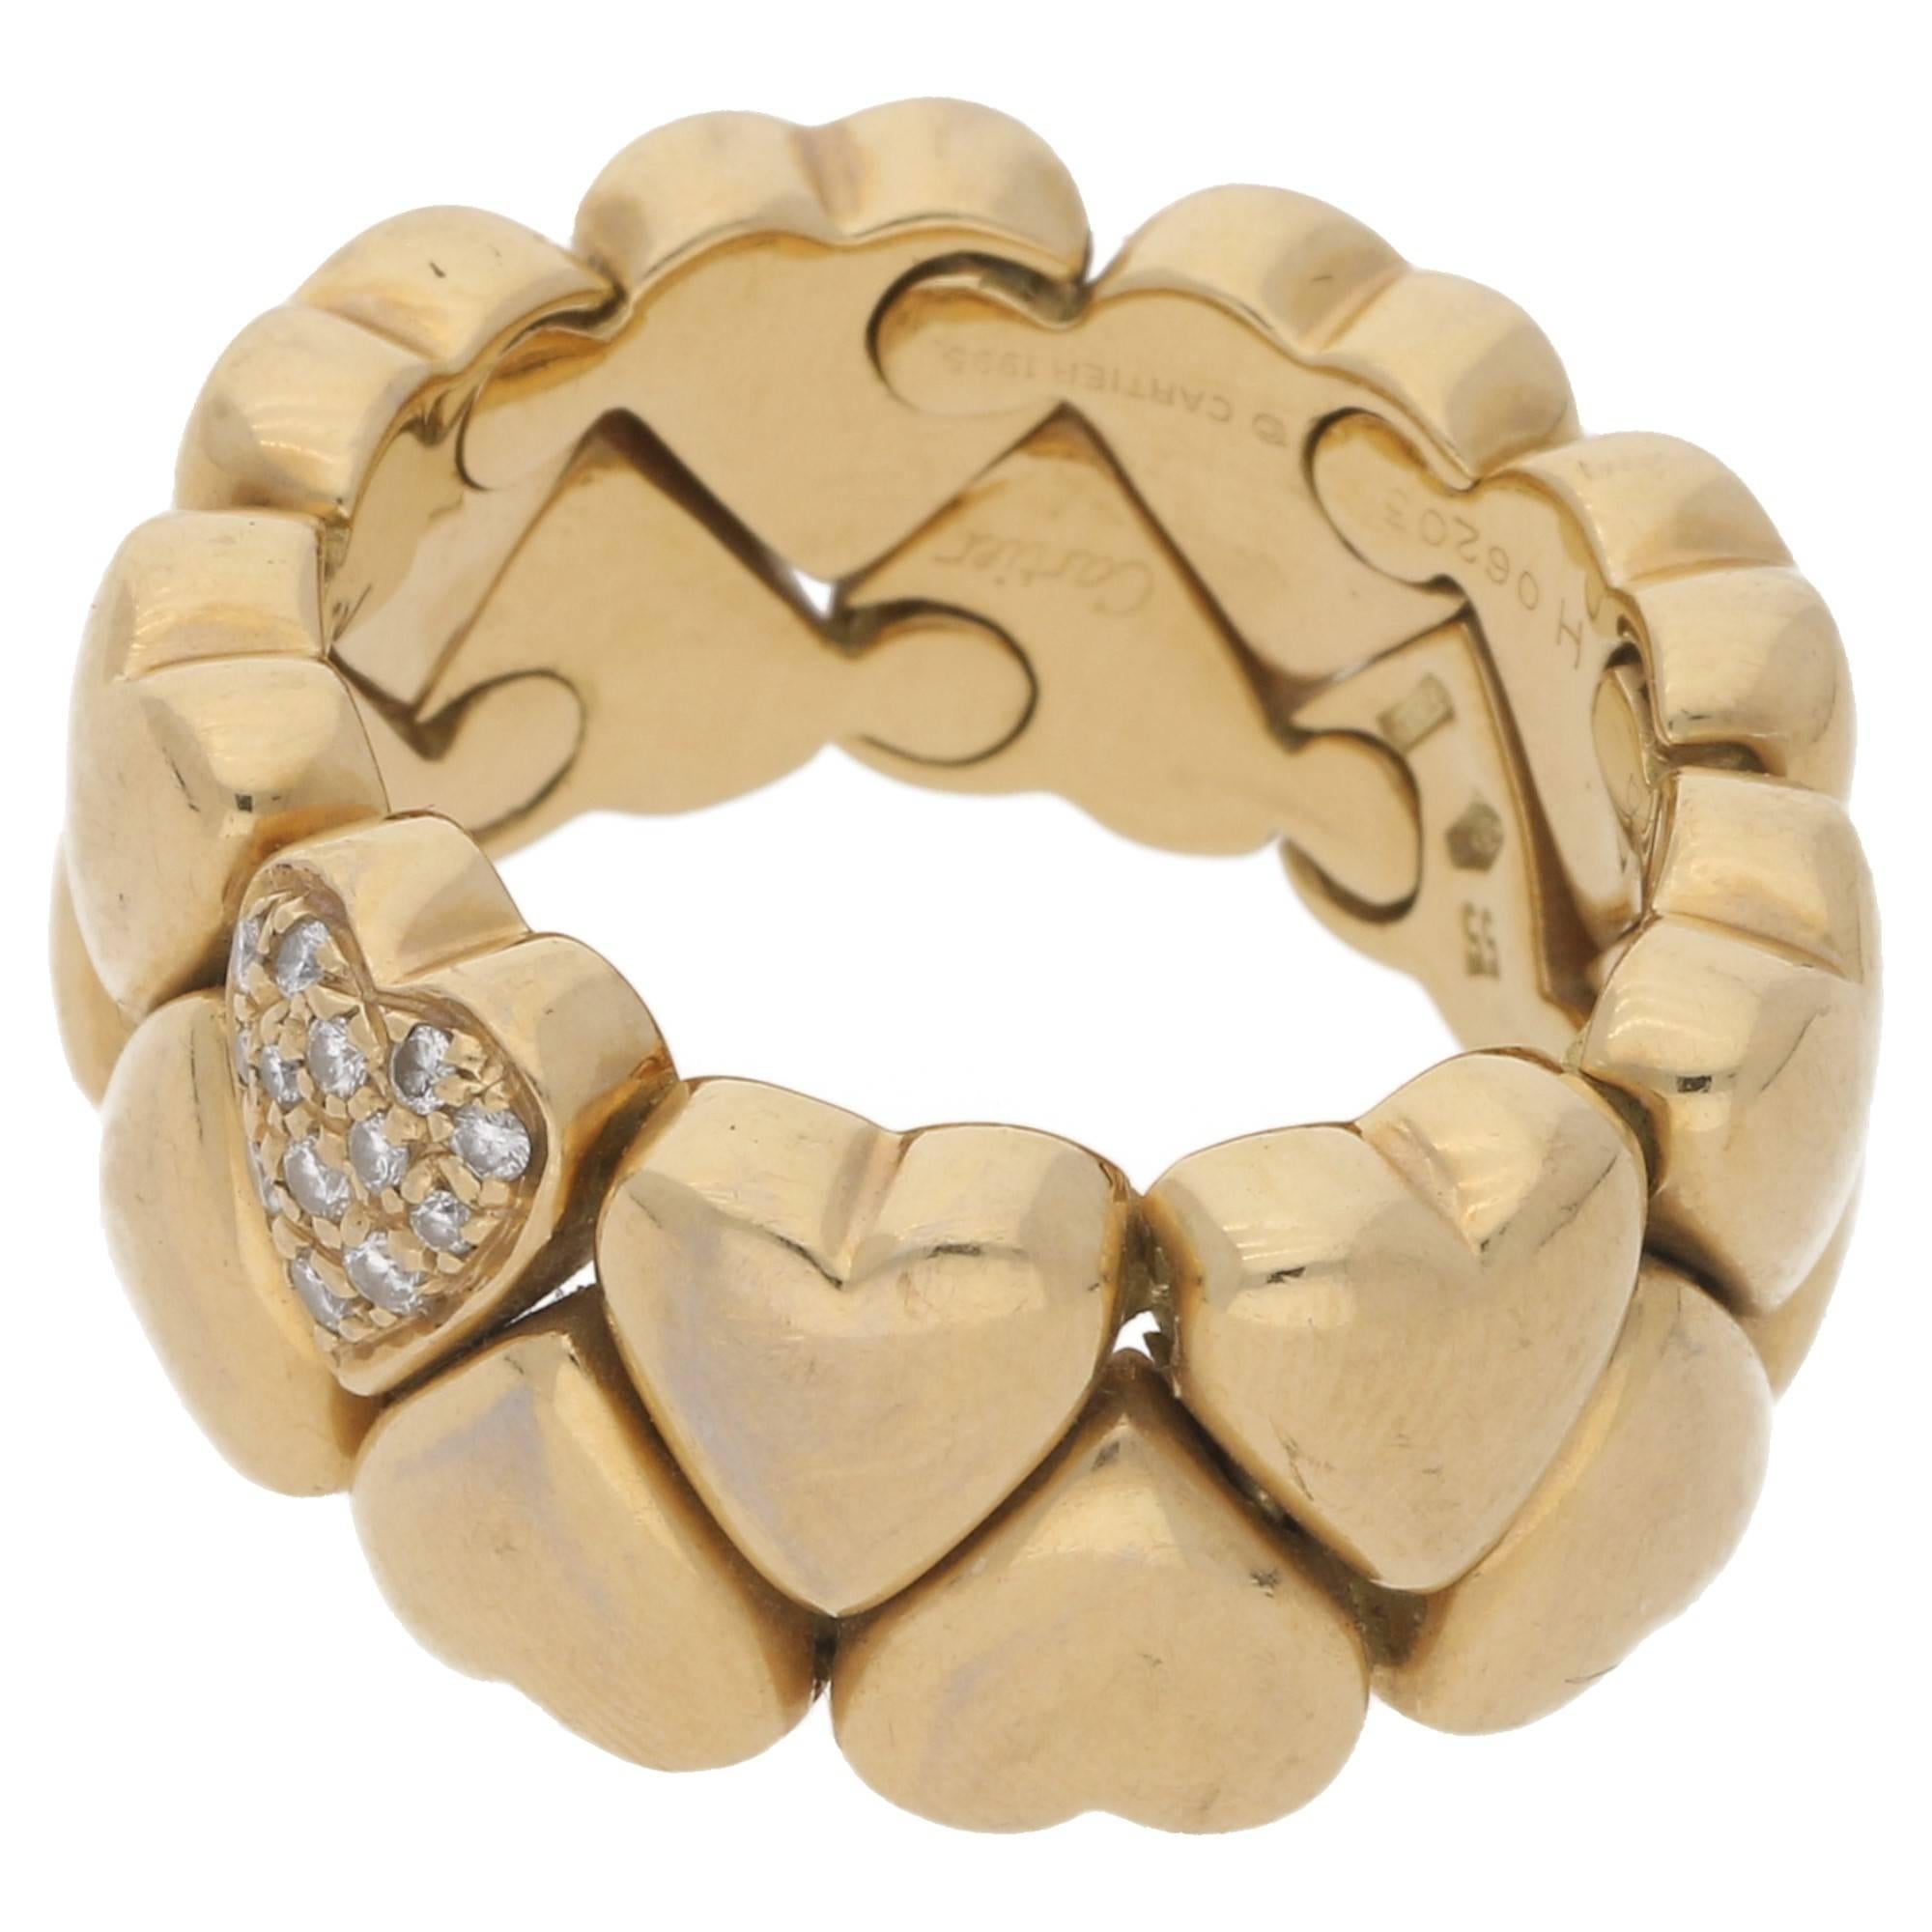 A 1980s Cartier double row heart motif ring in 18ct yellow gold. Each heart is individually linked to the other ensuring a beautiful and tactile flexibility to the ring. One heart is pavé set with thirteen round faceted diamonds with a total carat